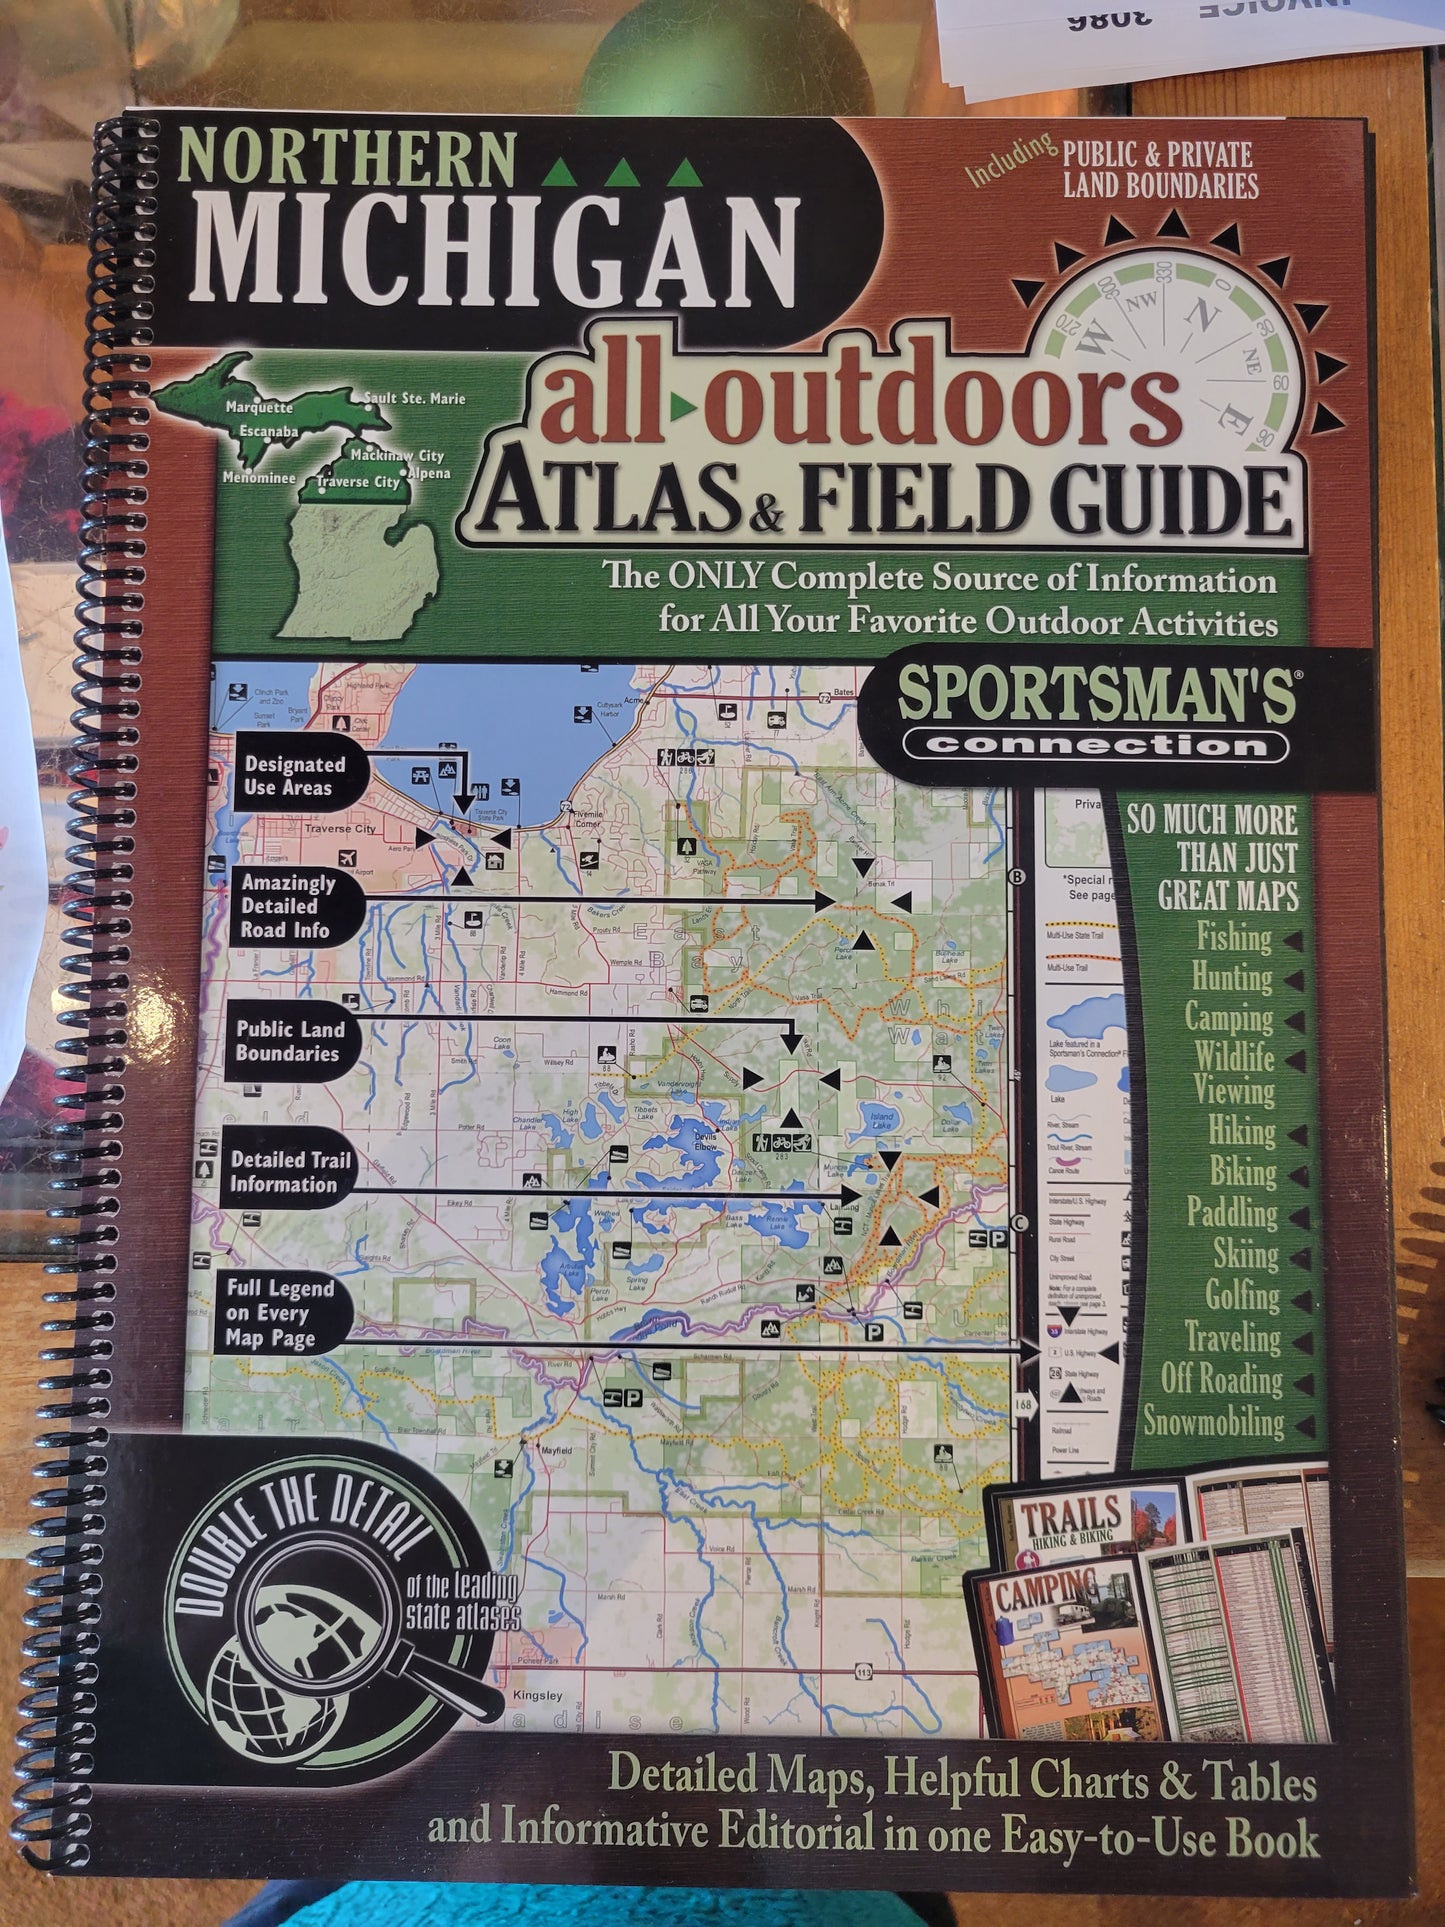 Northern Michigan all-outdoors Atlas and Field Guide